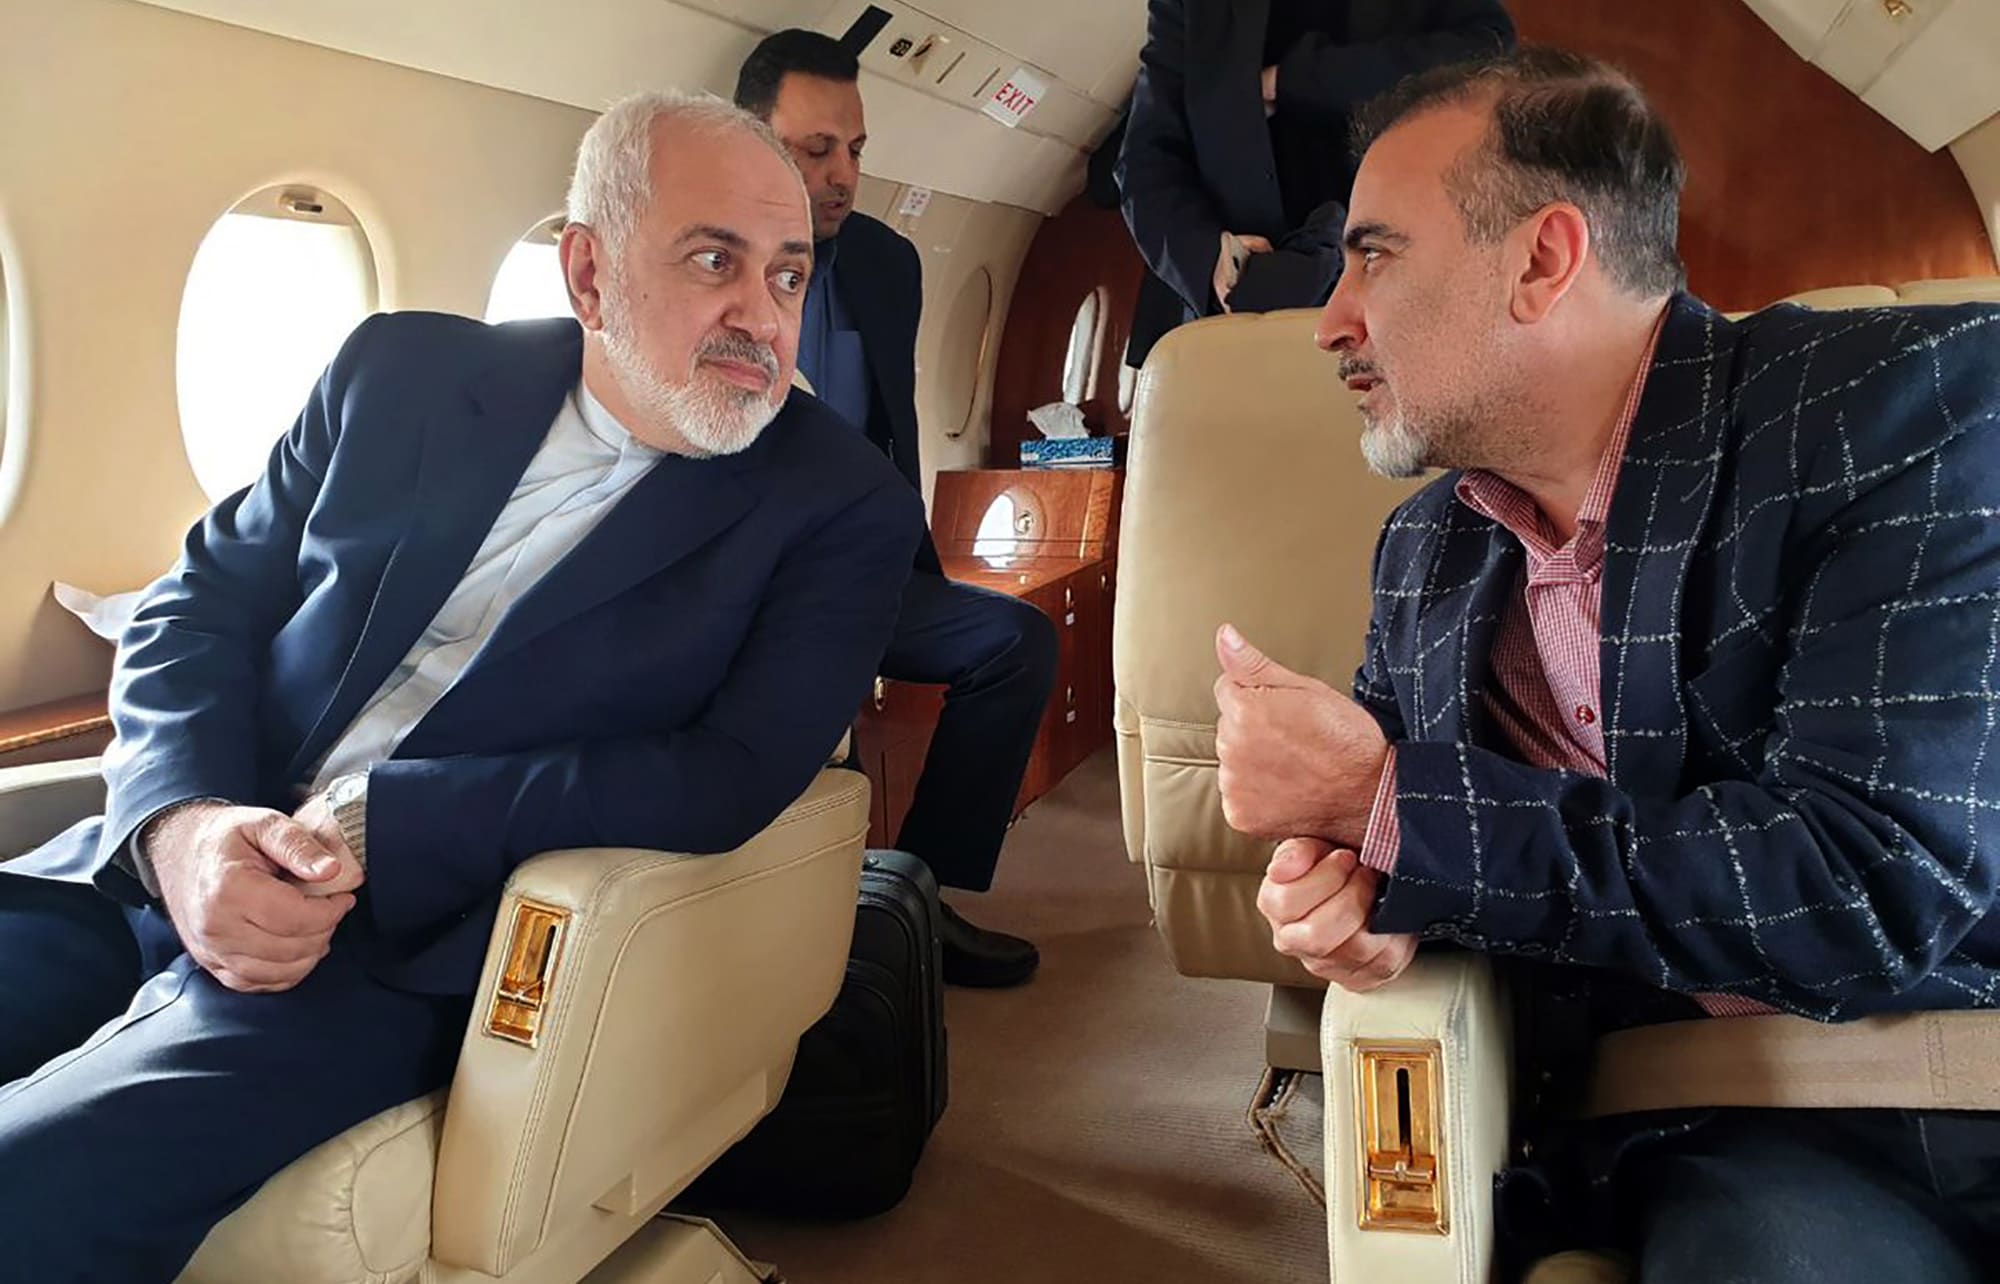 Foreign Minister Mohammad Javad Zarif (L) and Iranian scientist Massoud Soleimani speaking to each other while sitting in a plane at an undisclosed location.